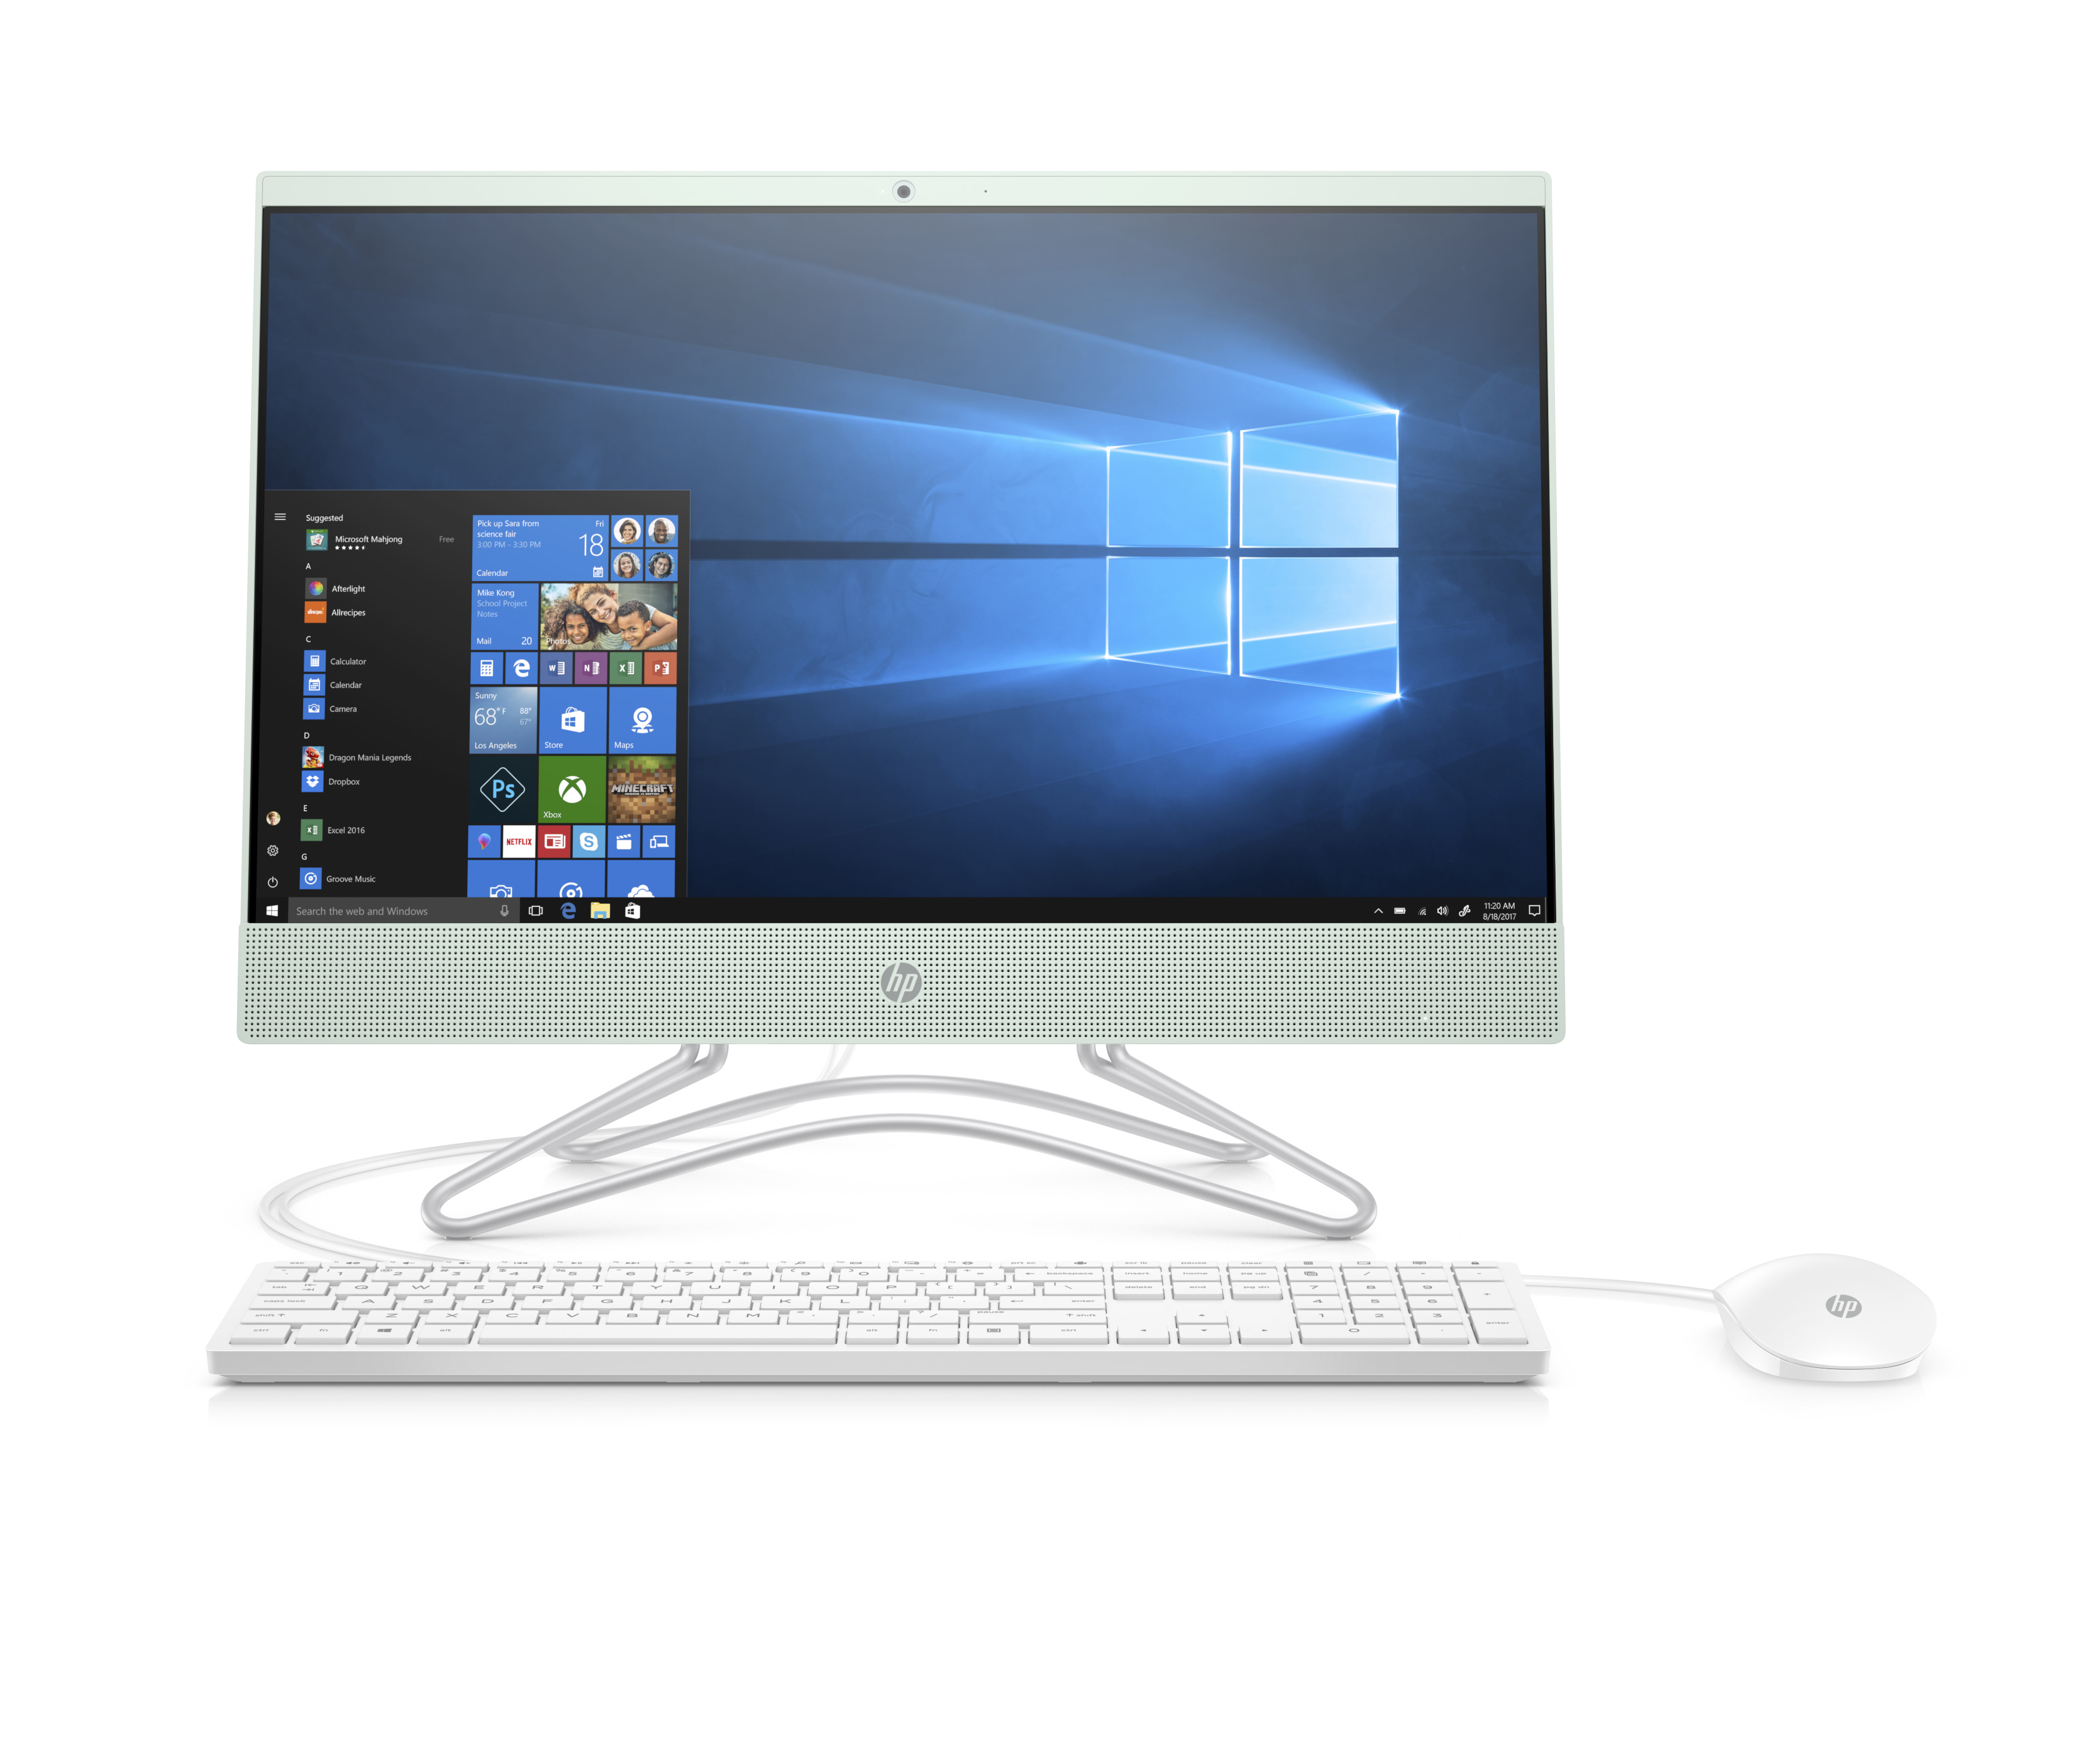 HP 22-c0073w All-in-One PC, 22" Display, Intel Celeron G4900T 2.9 GHz, 4GB RAM, 1TB HDD - image 1 of 5